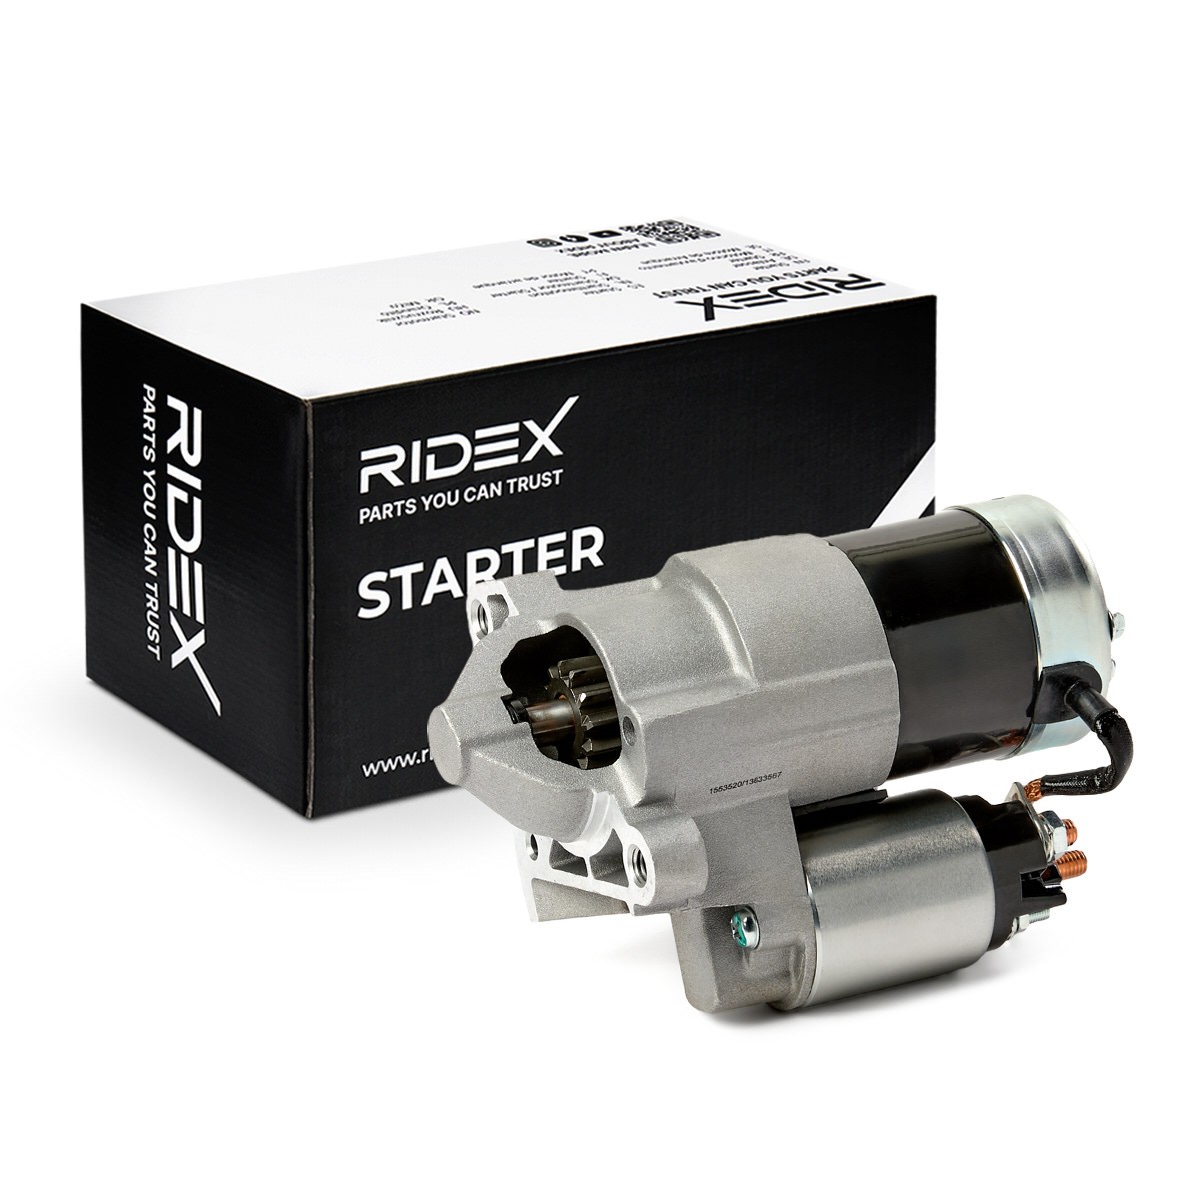 2S0146 RIDEX Starter Renault SCÉNIC review